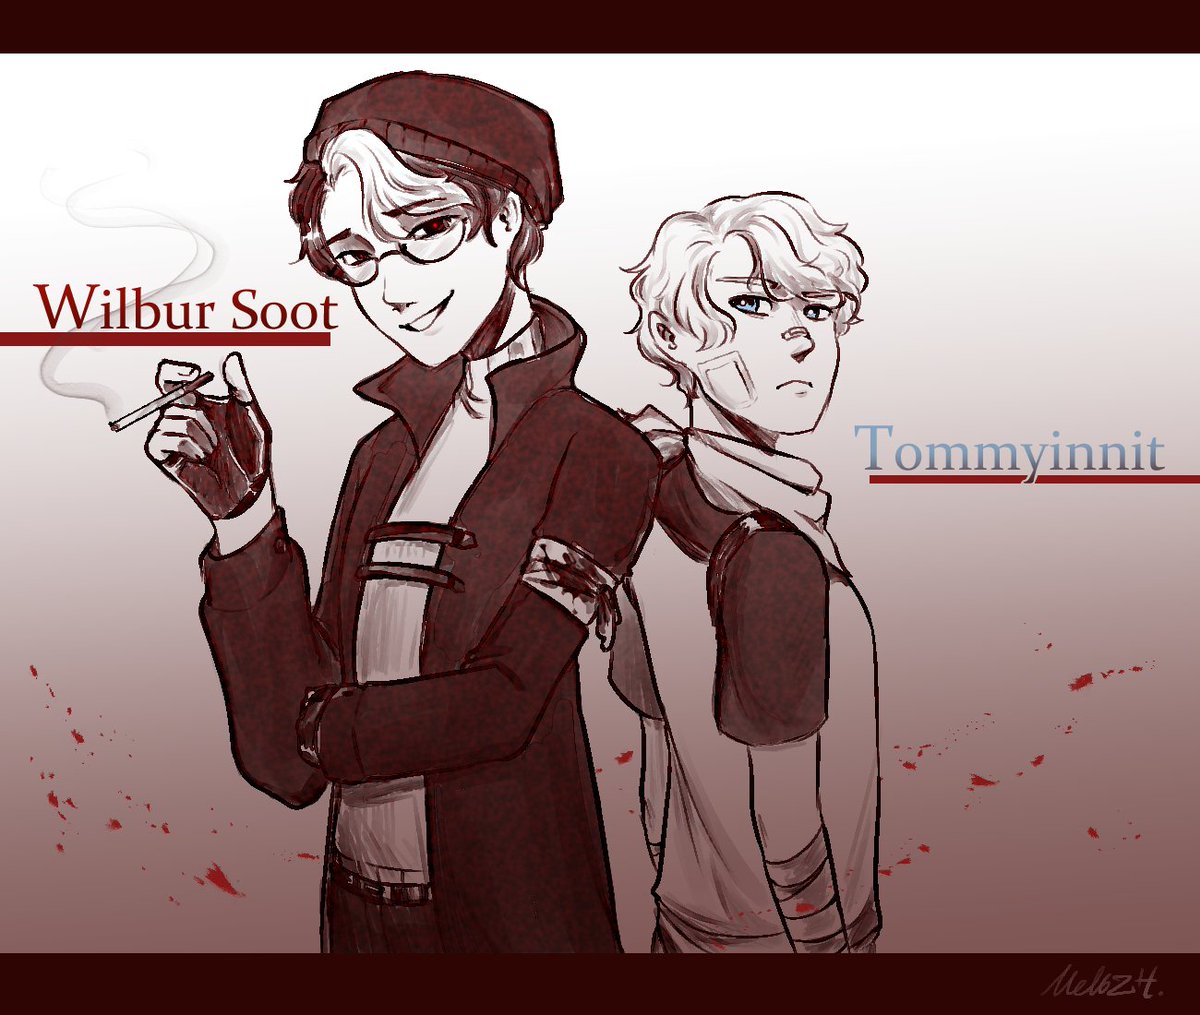 Crimeboys is here What will They do?
BTW How many canon Do They have now?
#DSMPfanart #wilburfanart #tommyinnitfanart #crimeboysfanart 